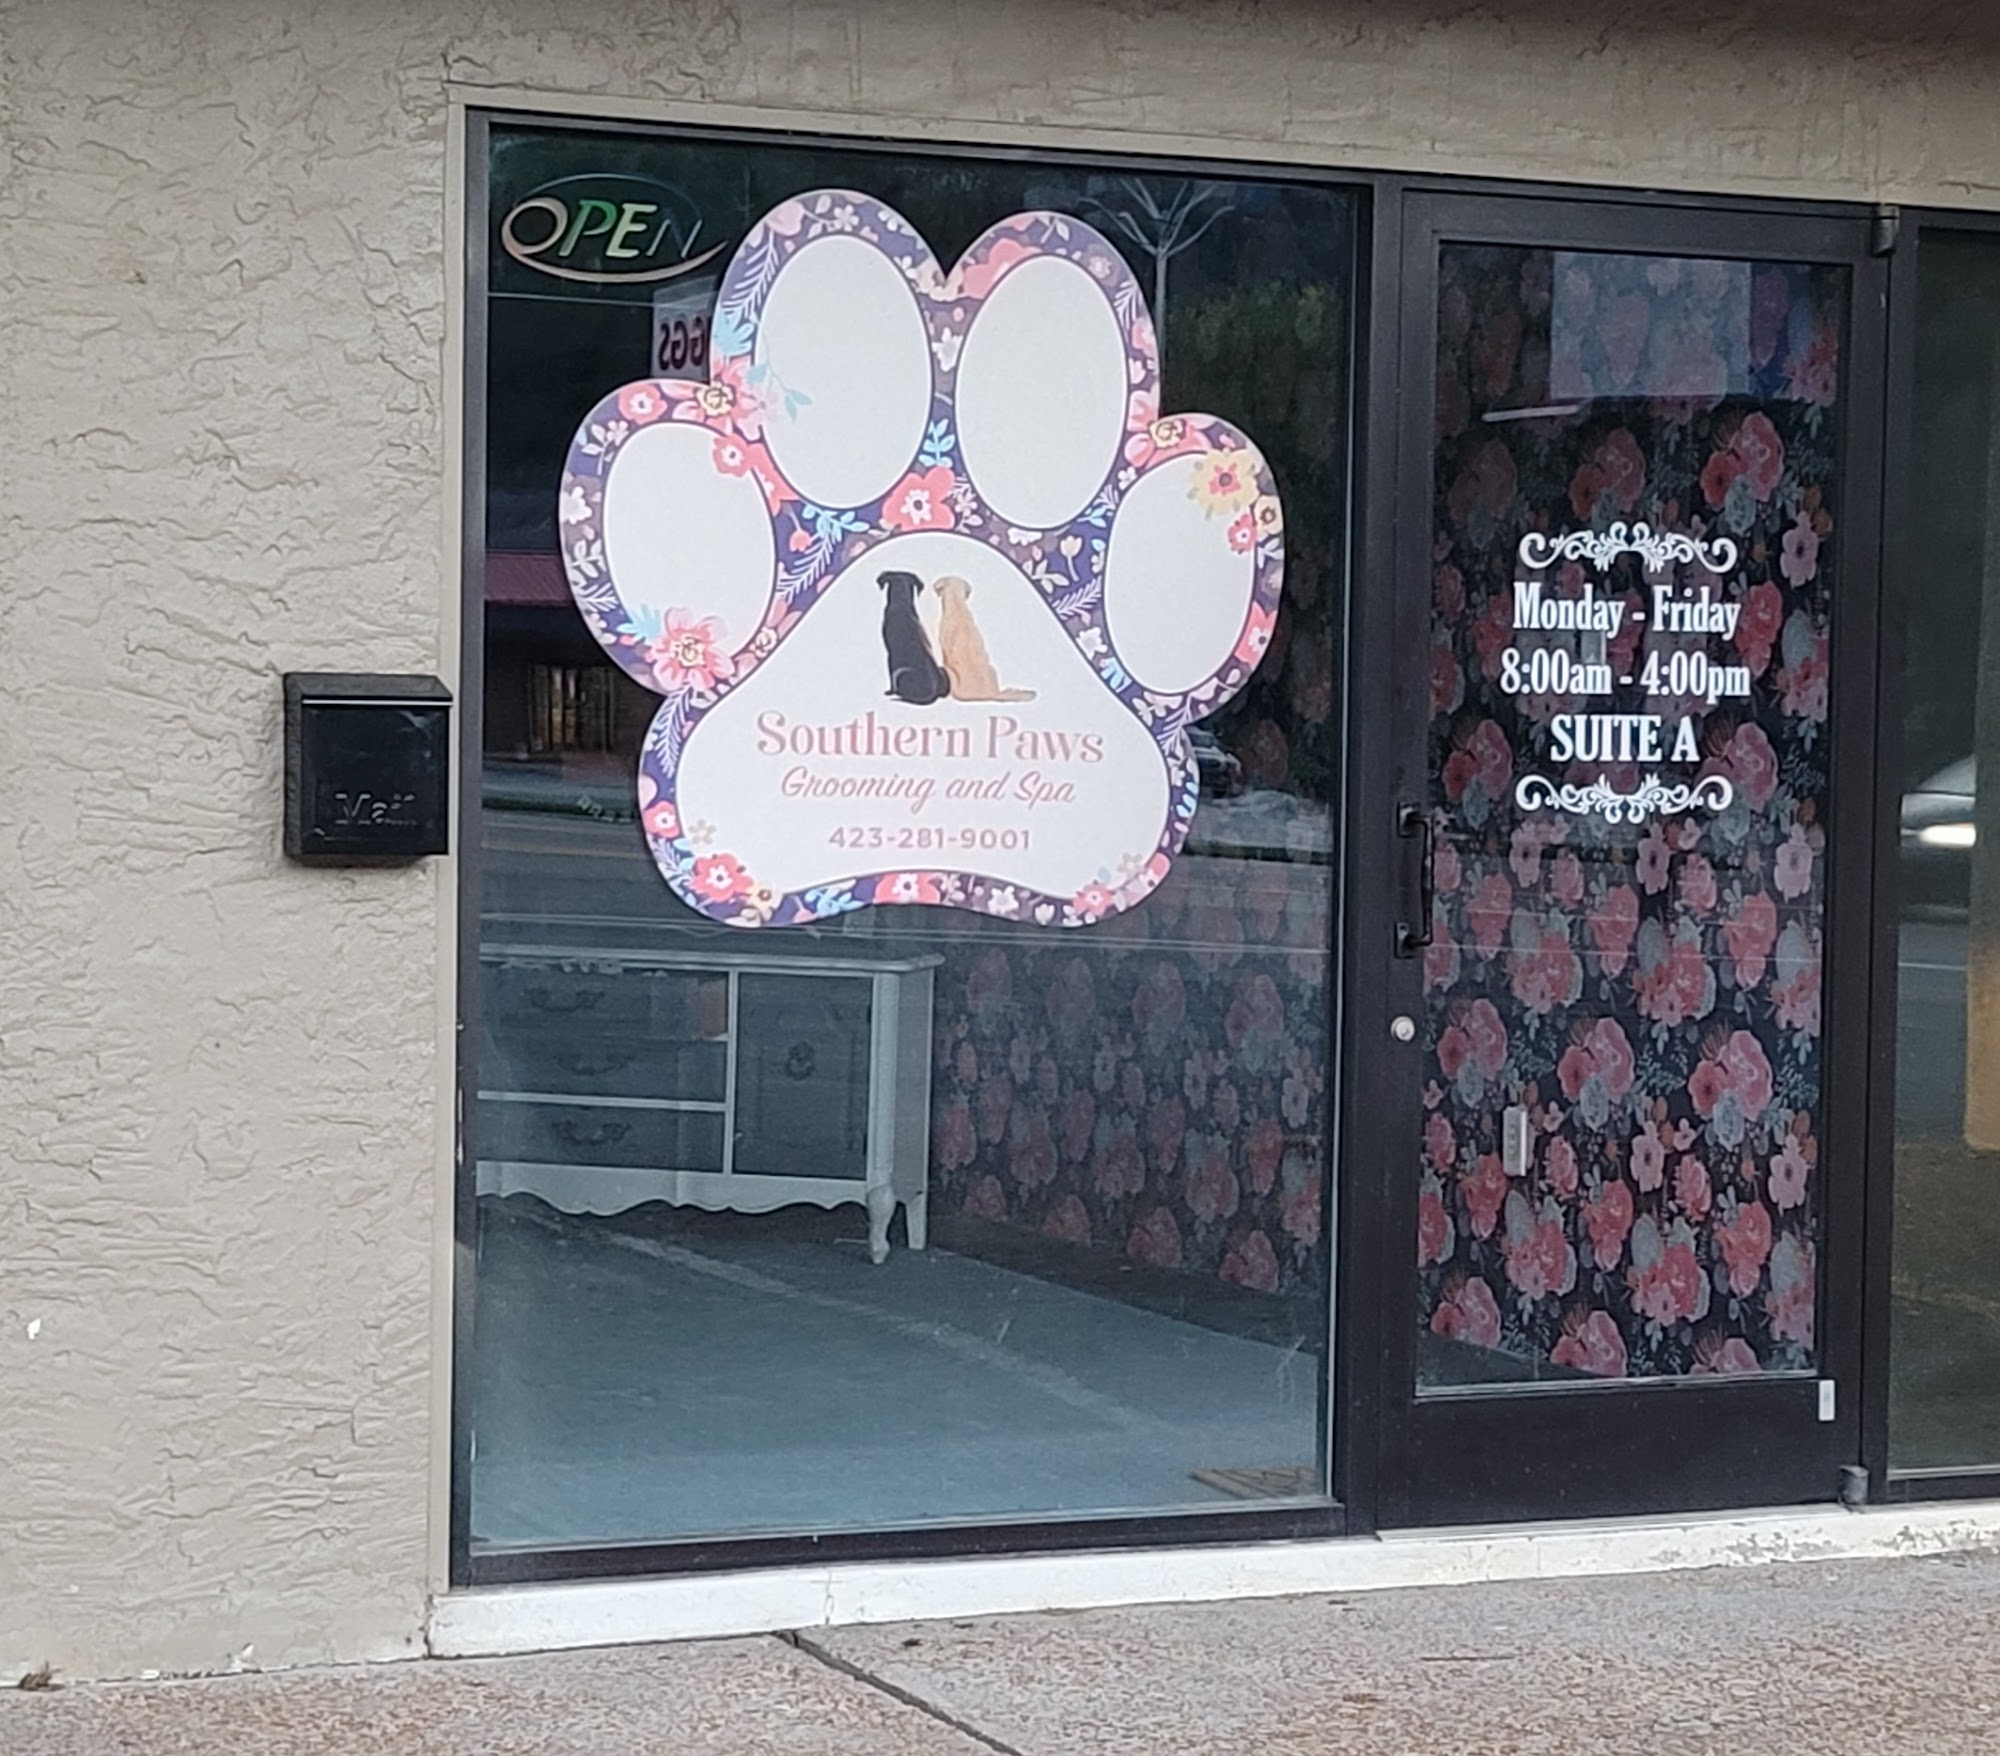 Southern Paws Grooming and Spa 503 W Central Ave, LaFollette Tennessee 37766